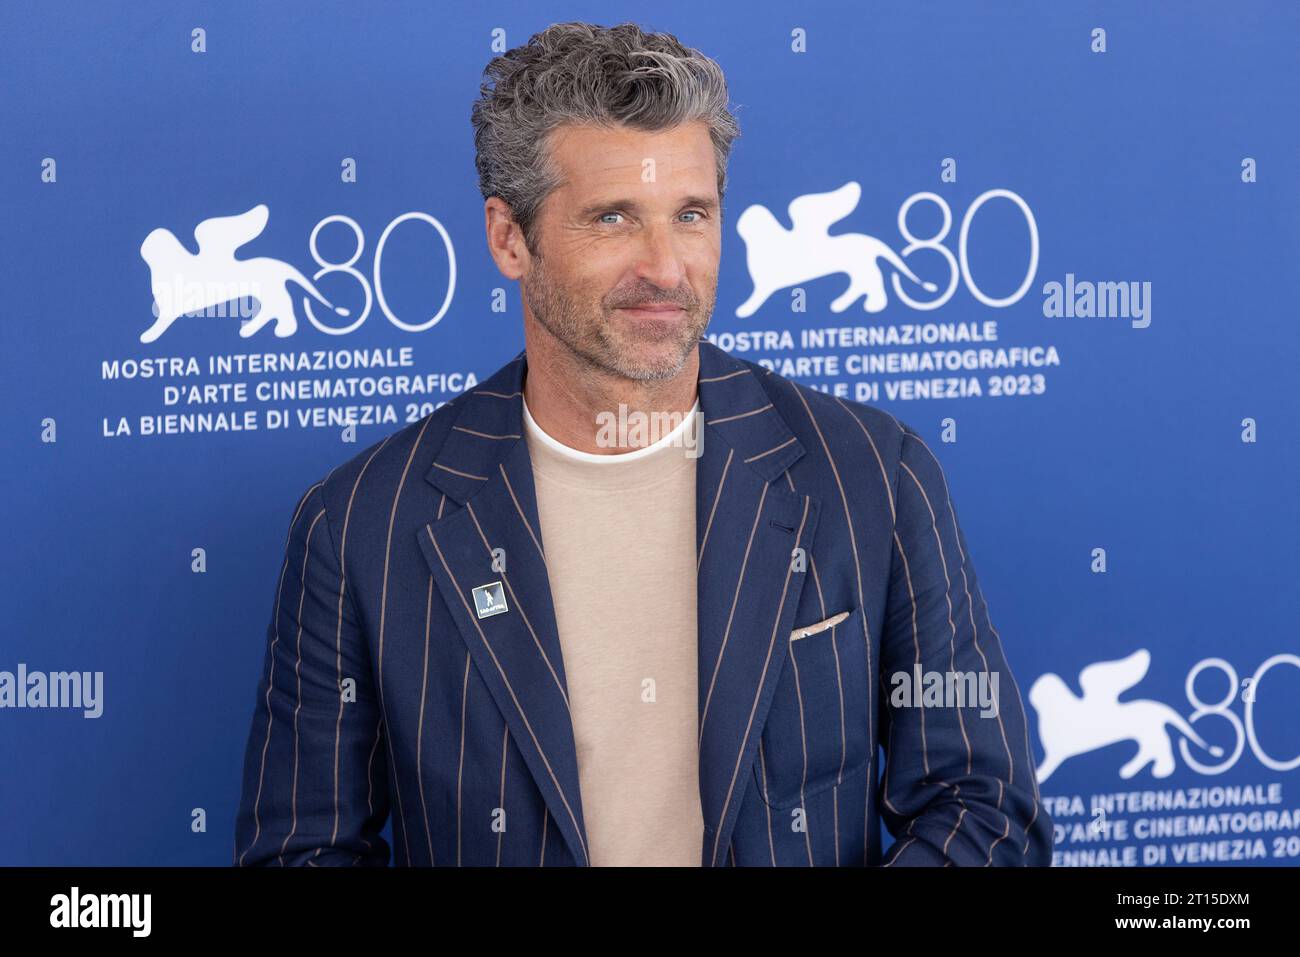 VENICE, ITALY - AUGUST 31: Patrick Dempsey attends the photo-call for the movie 'Ferrari' at the 80th Venice International Film Festival on August 31, Stock Photo